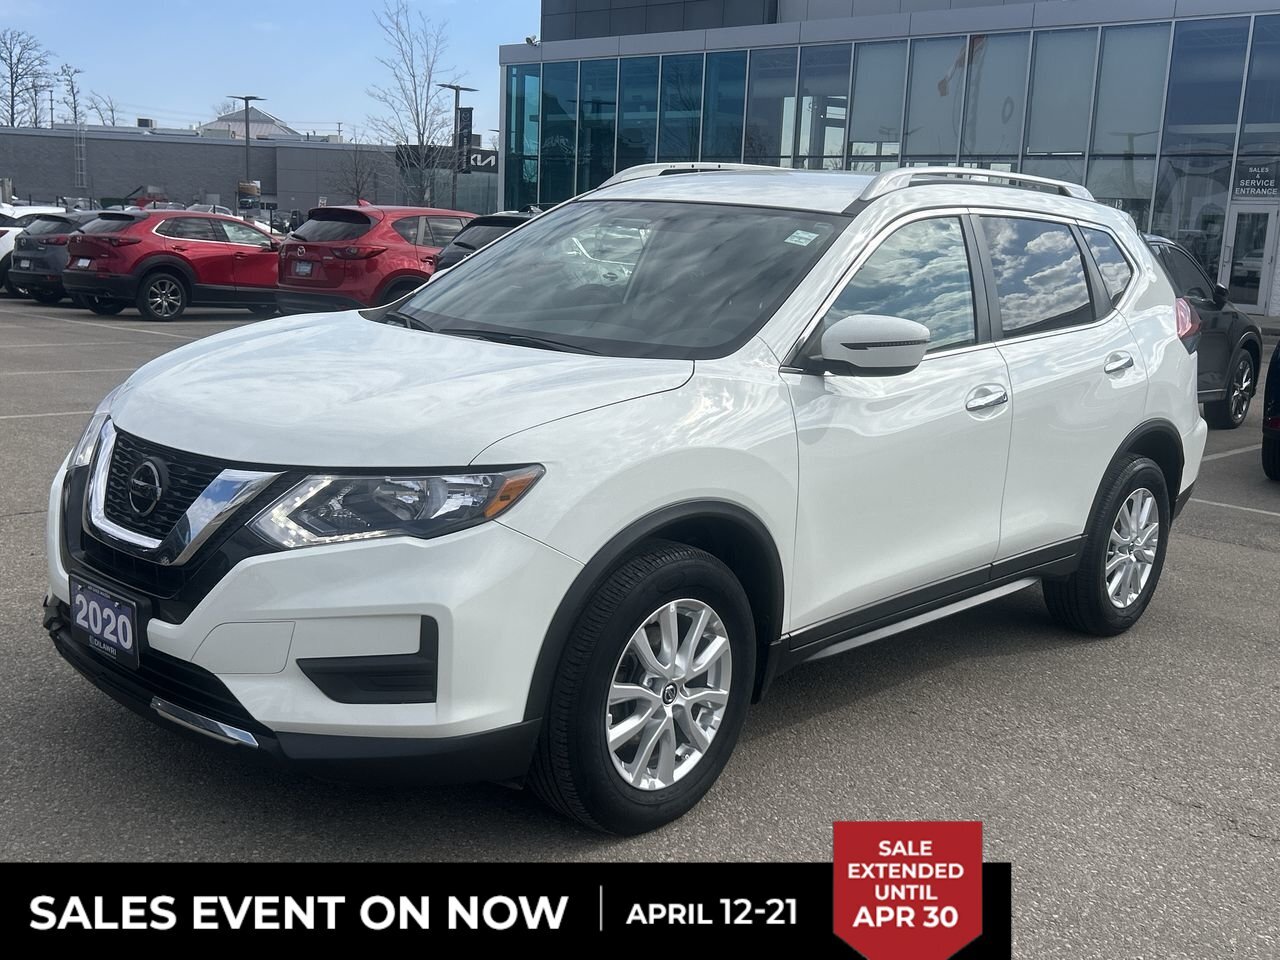 2020 Nissan Rogue S 1OWNER|DILAWRI CERTIFIED|CLEAN CARFAX / 